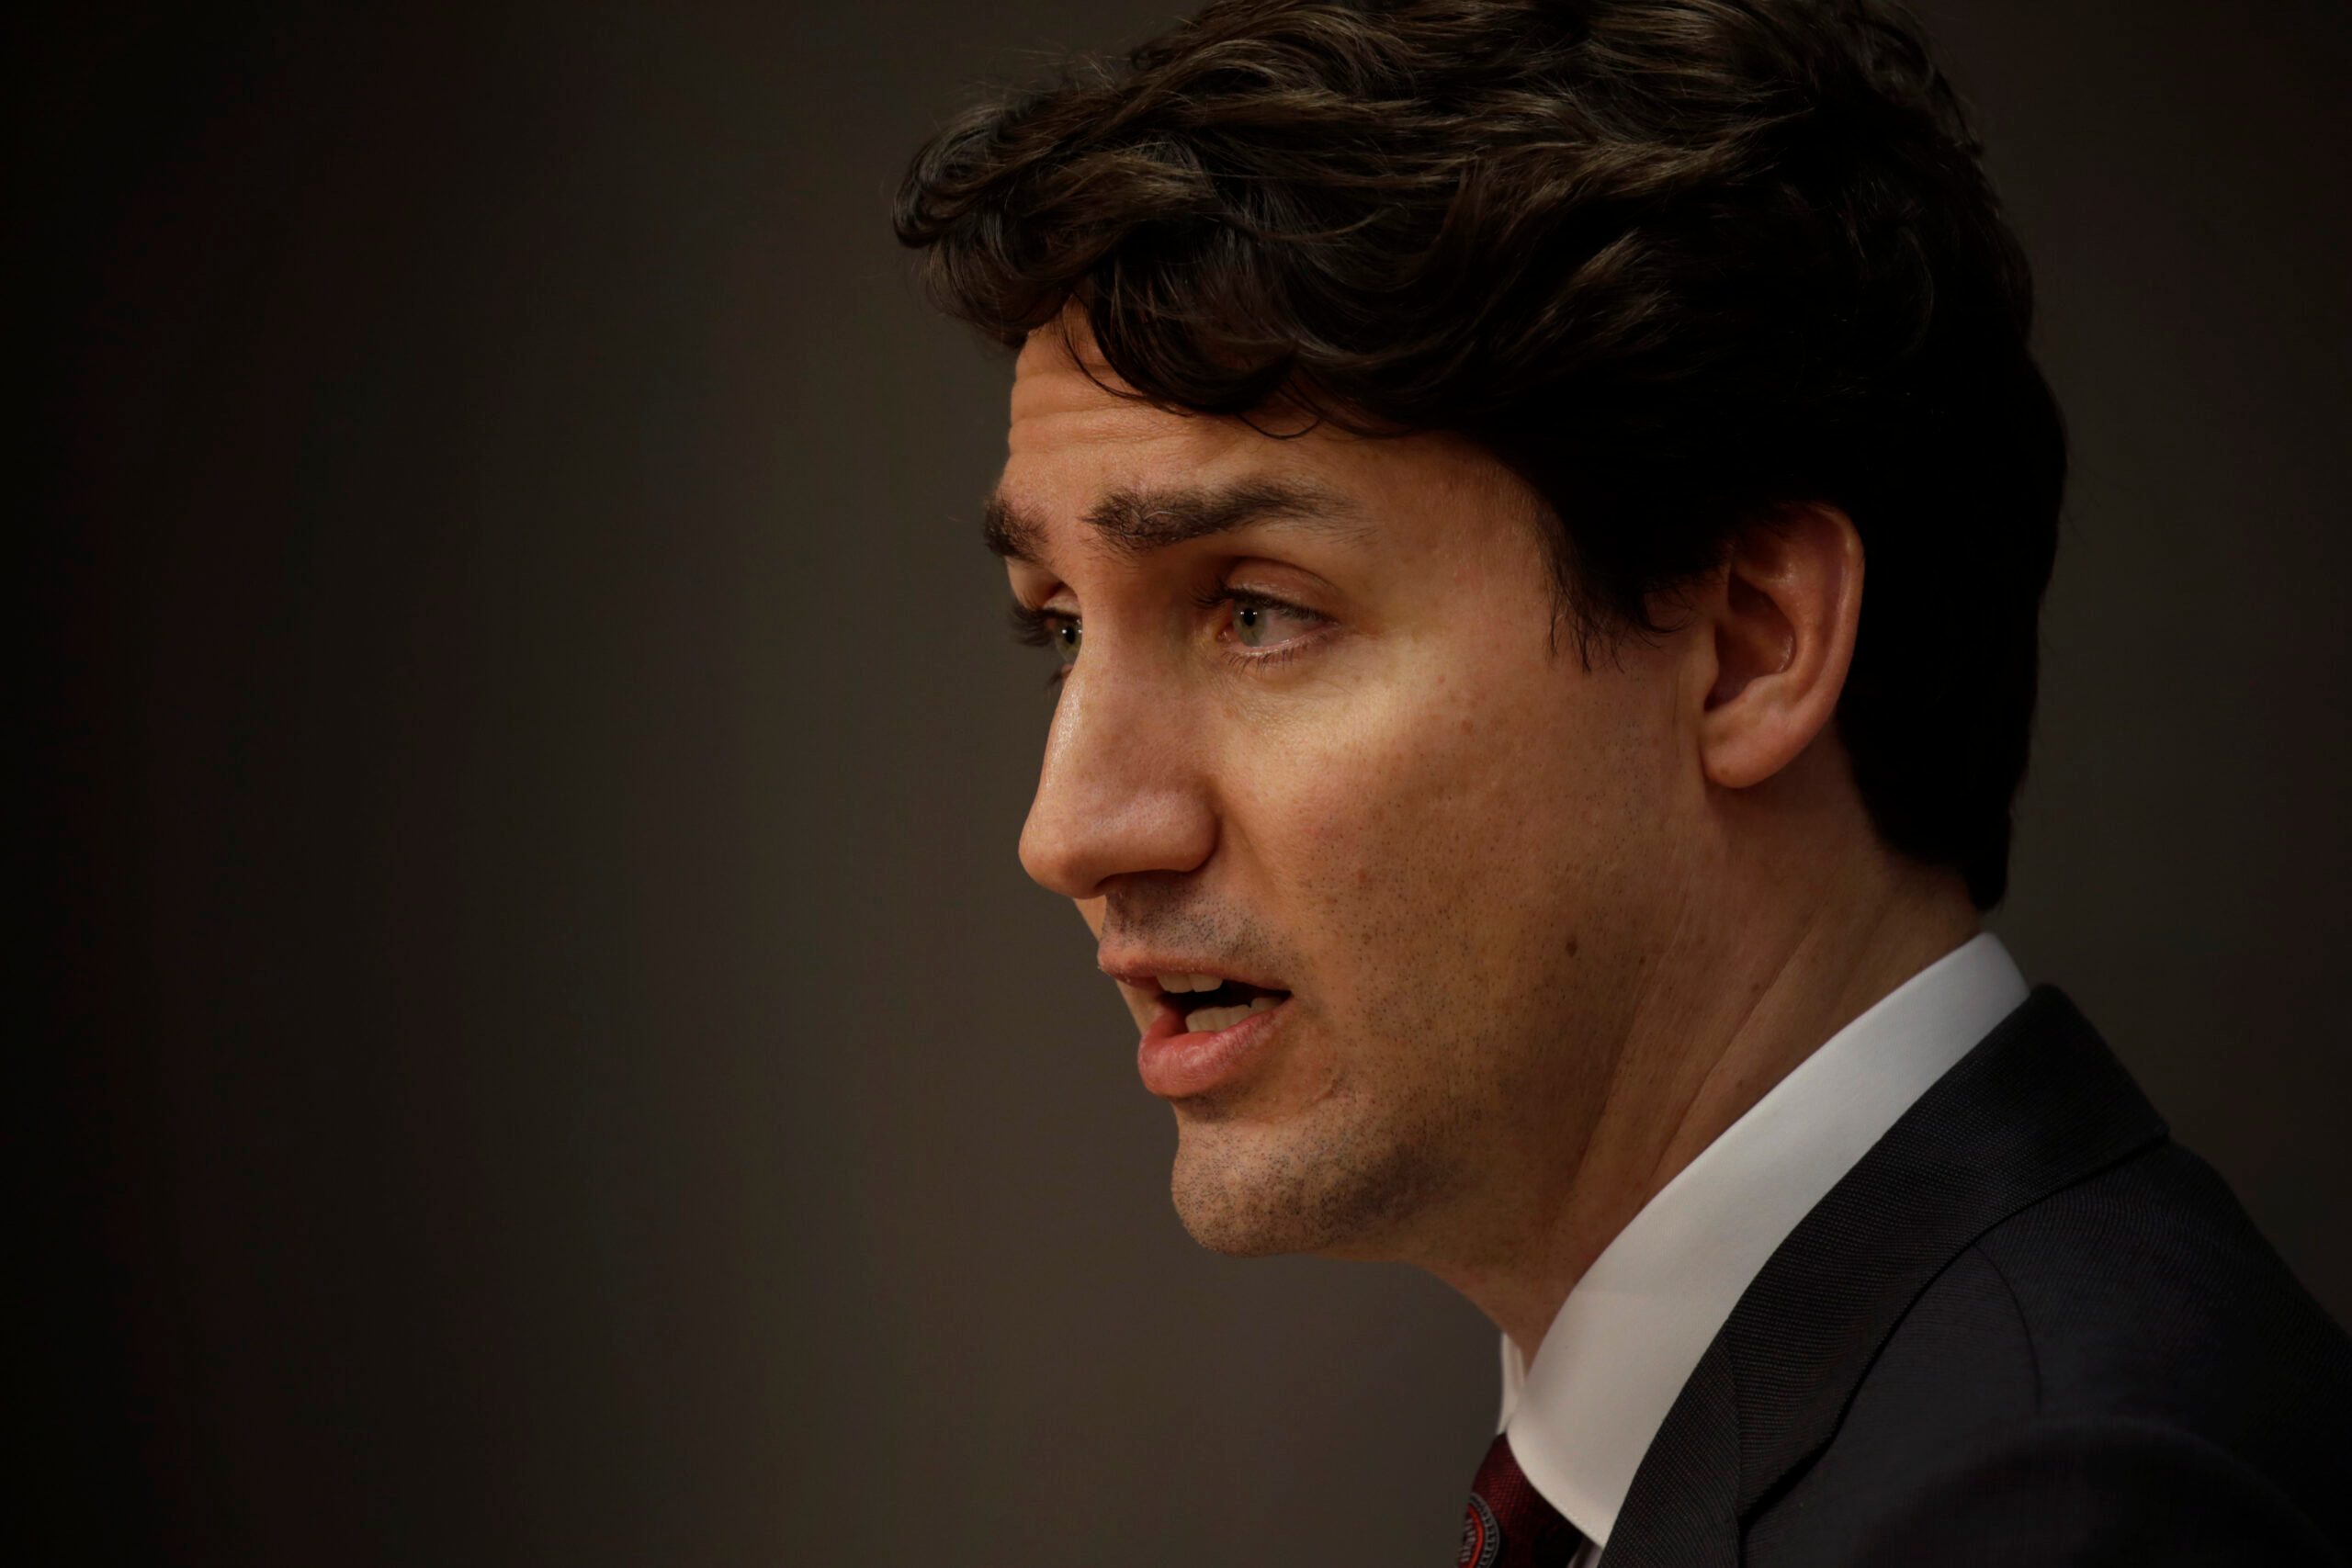 Opposition in Ottawa assails Trudeau for grabbing, jostling MPs